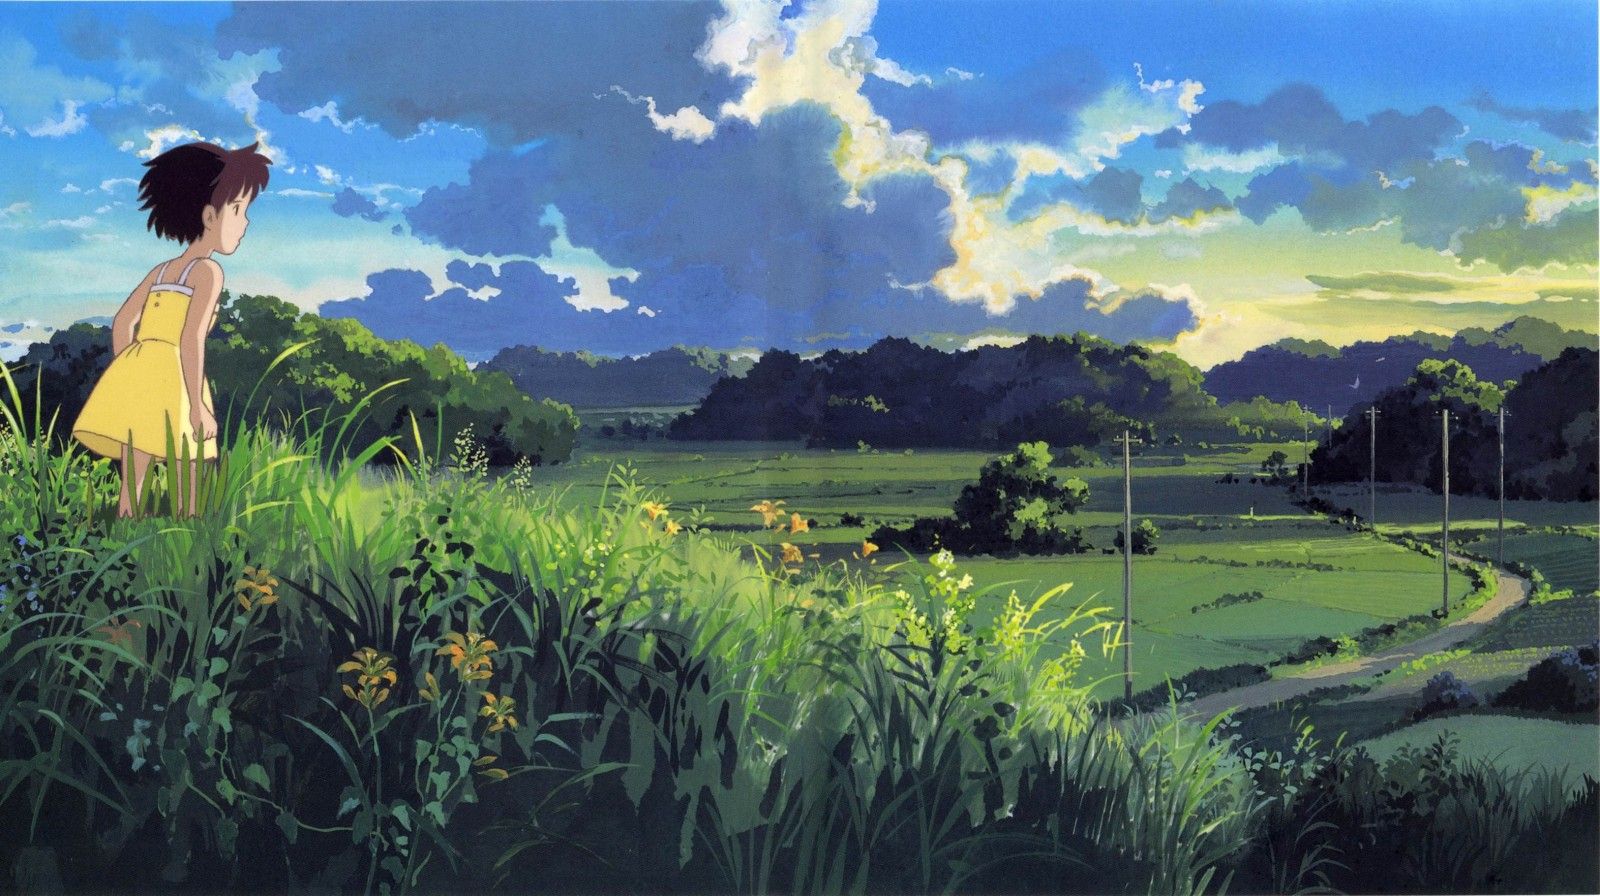 sunlight, landscape, sunset, anime girls, nature, grass, sky, field, morning, Totoro, My Neighbor Totoro, Studio Ghibli, flower, grassland, agriculture, meadow, plain, lawn, prairie, rural area, computer wallpaper, paddy field High quality